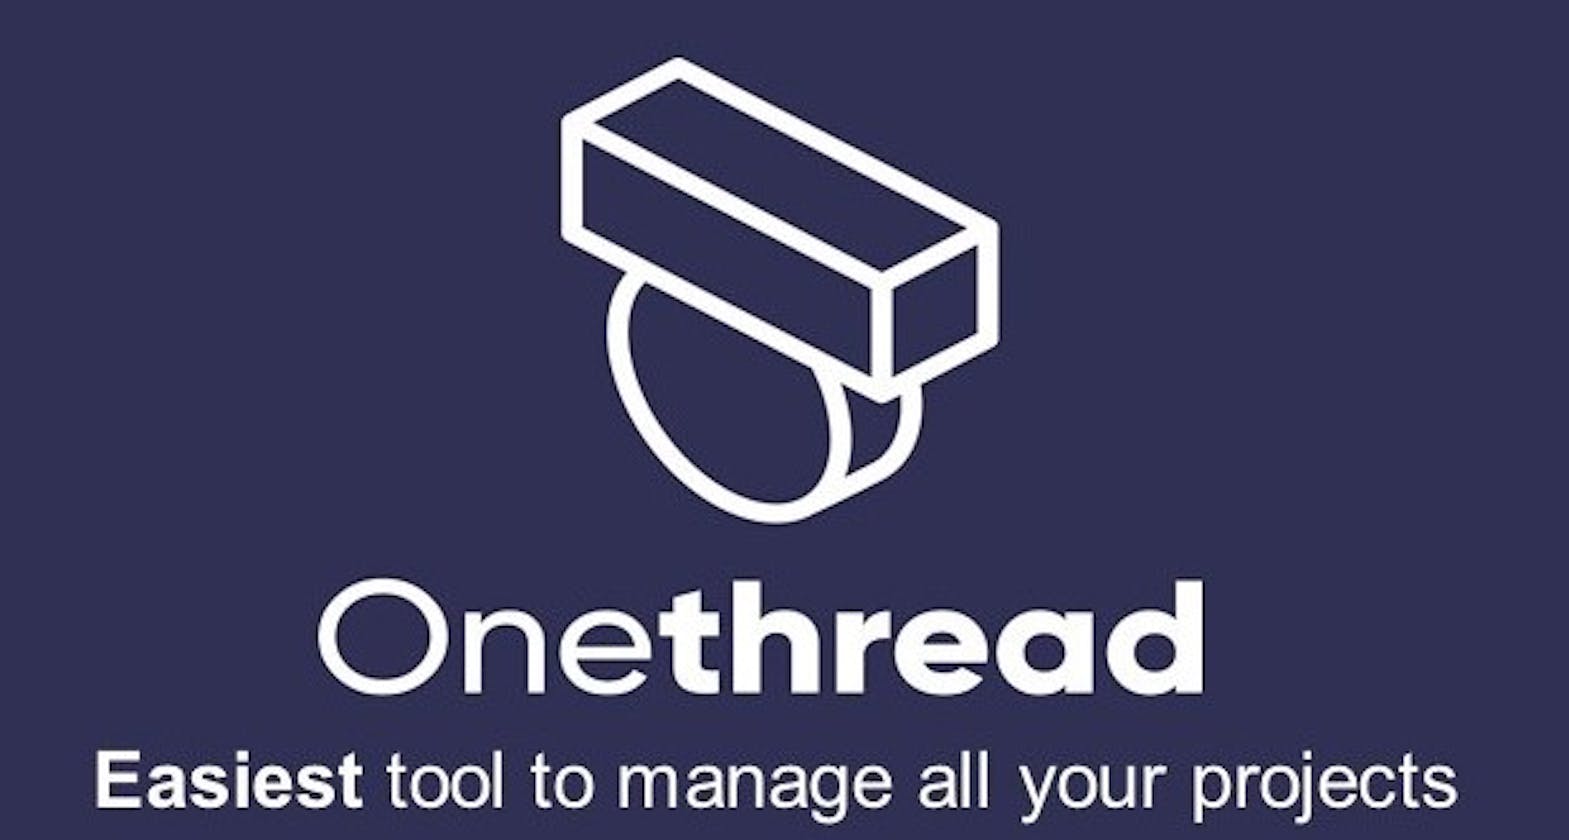 What is Onethread used for? Our favorite project management software explained.